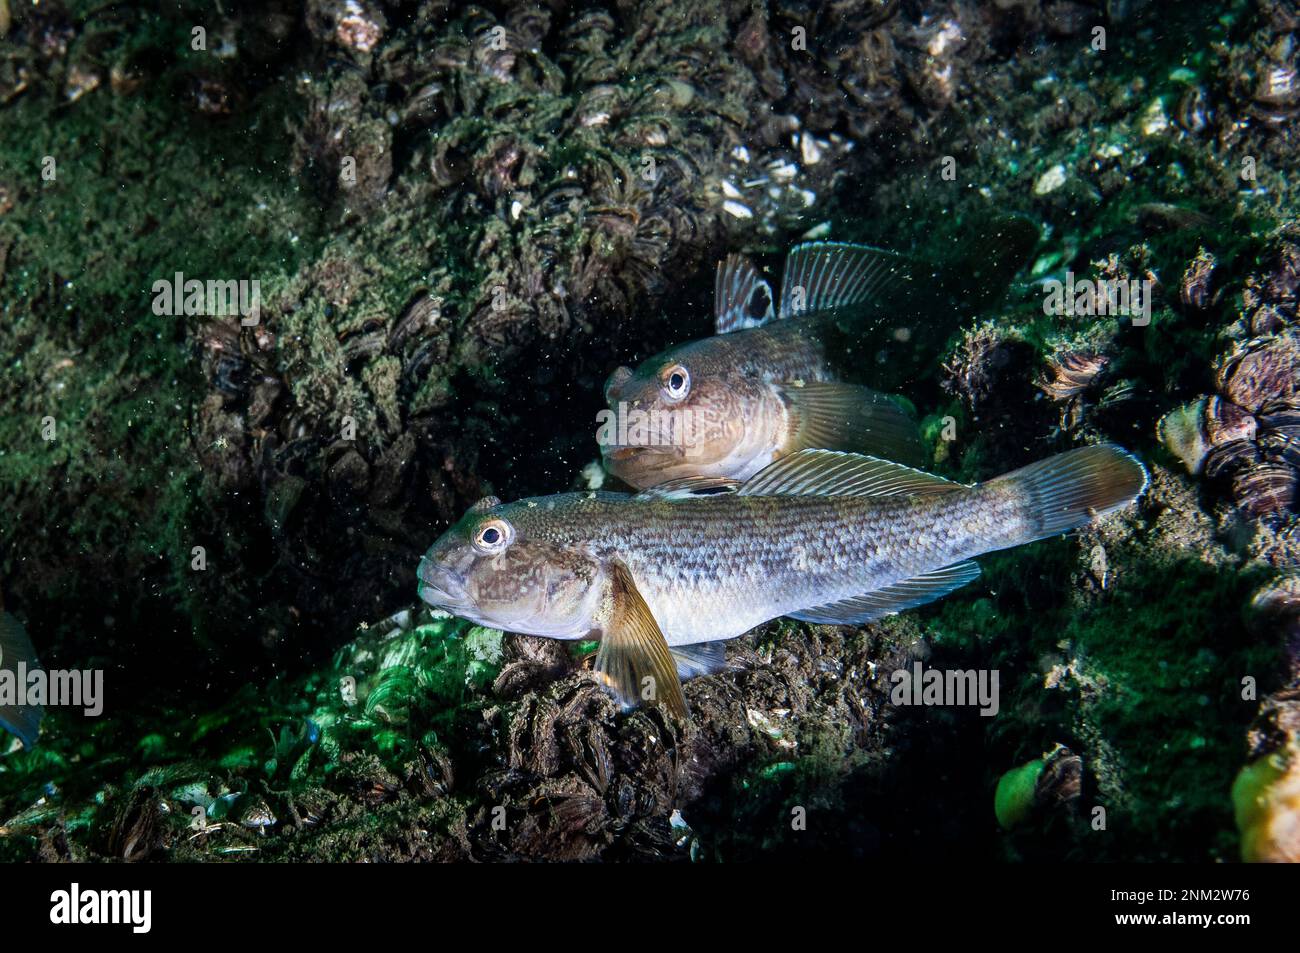 The Round Goby is an invasive species that has been accidentally introduced to numerous areas including the St. Lawrence River Stock Photo